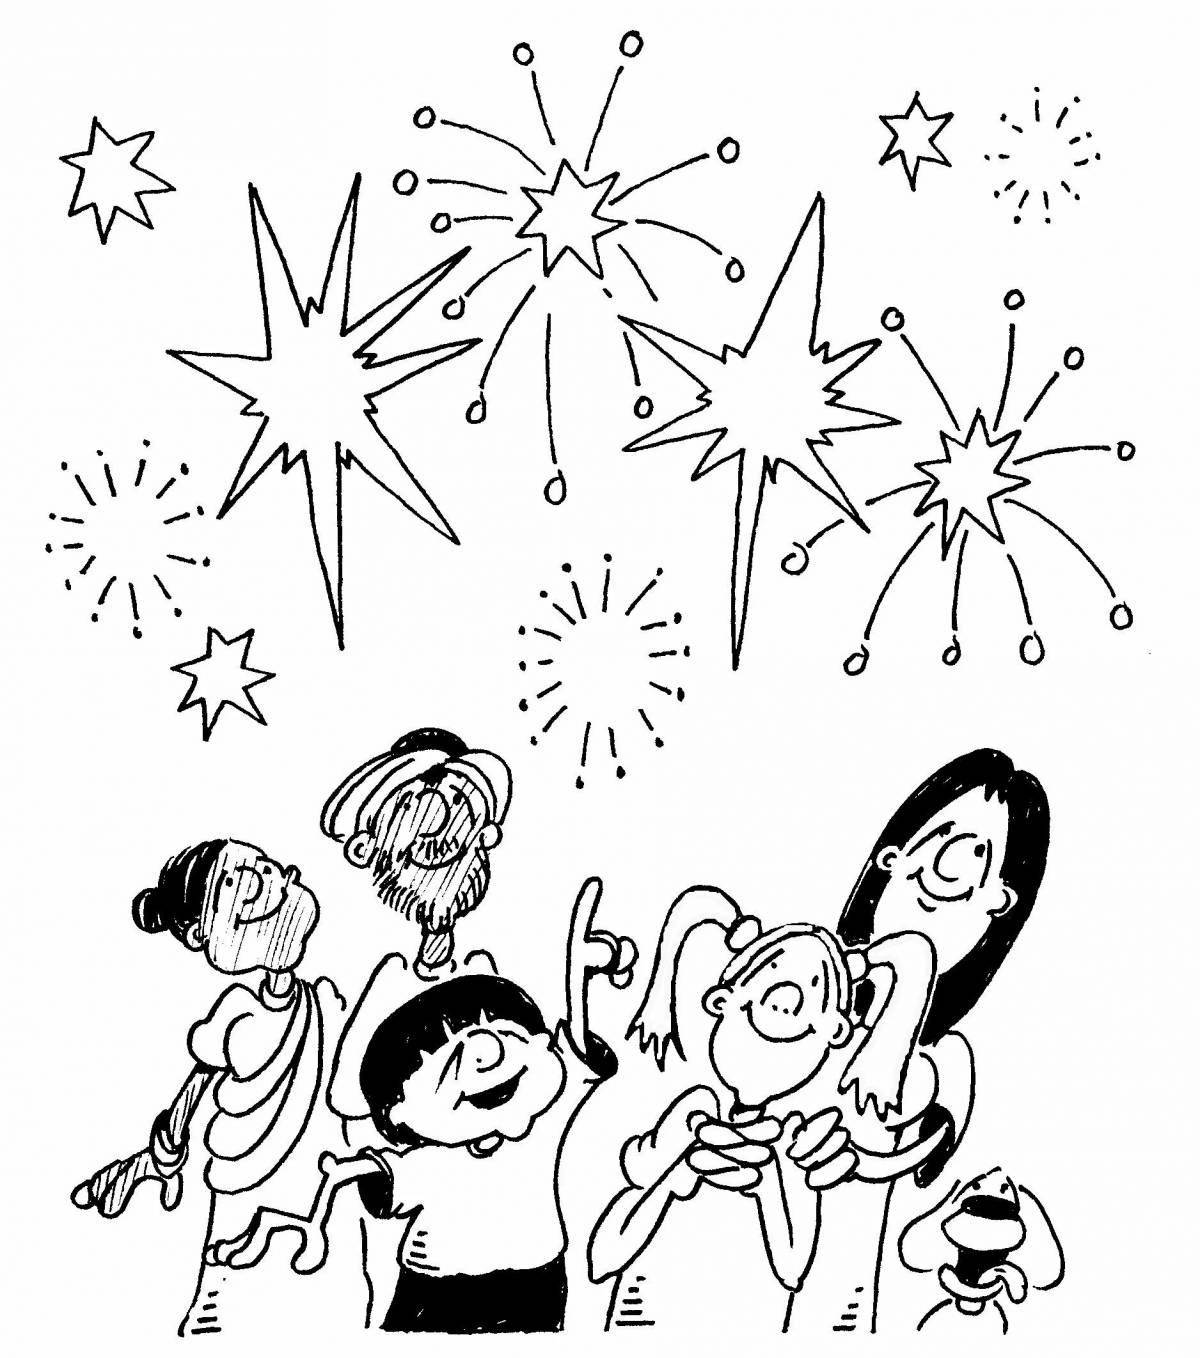 Charming sparklers coloring page